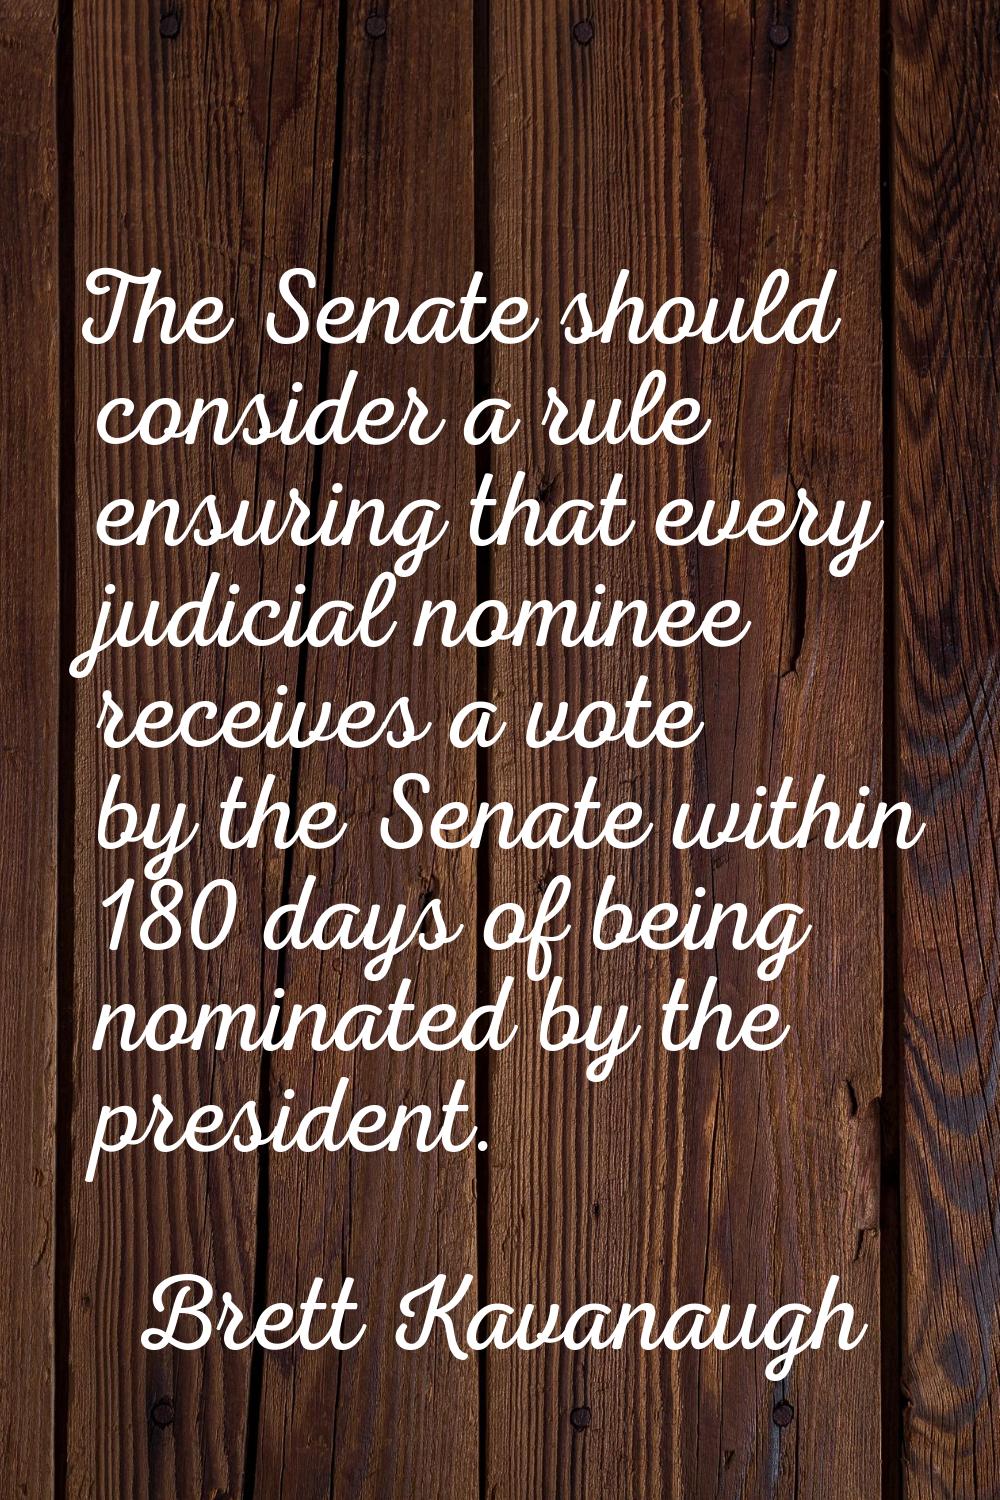 The Senate should consider a rule ensuring that every judicial nominee receives a vote by the Senat